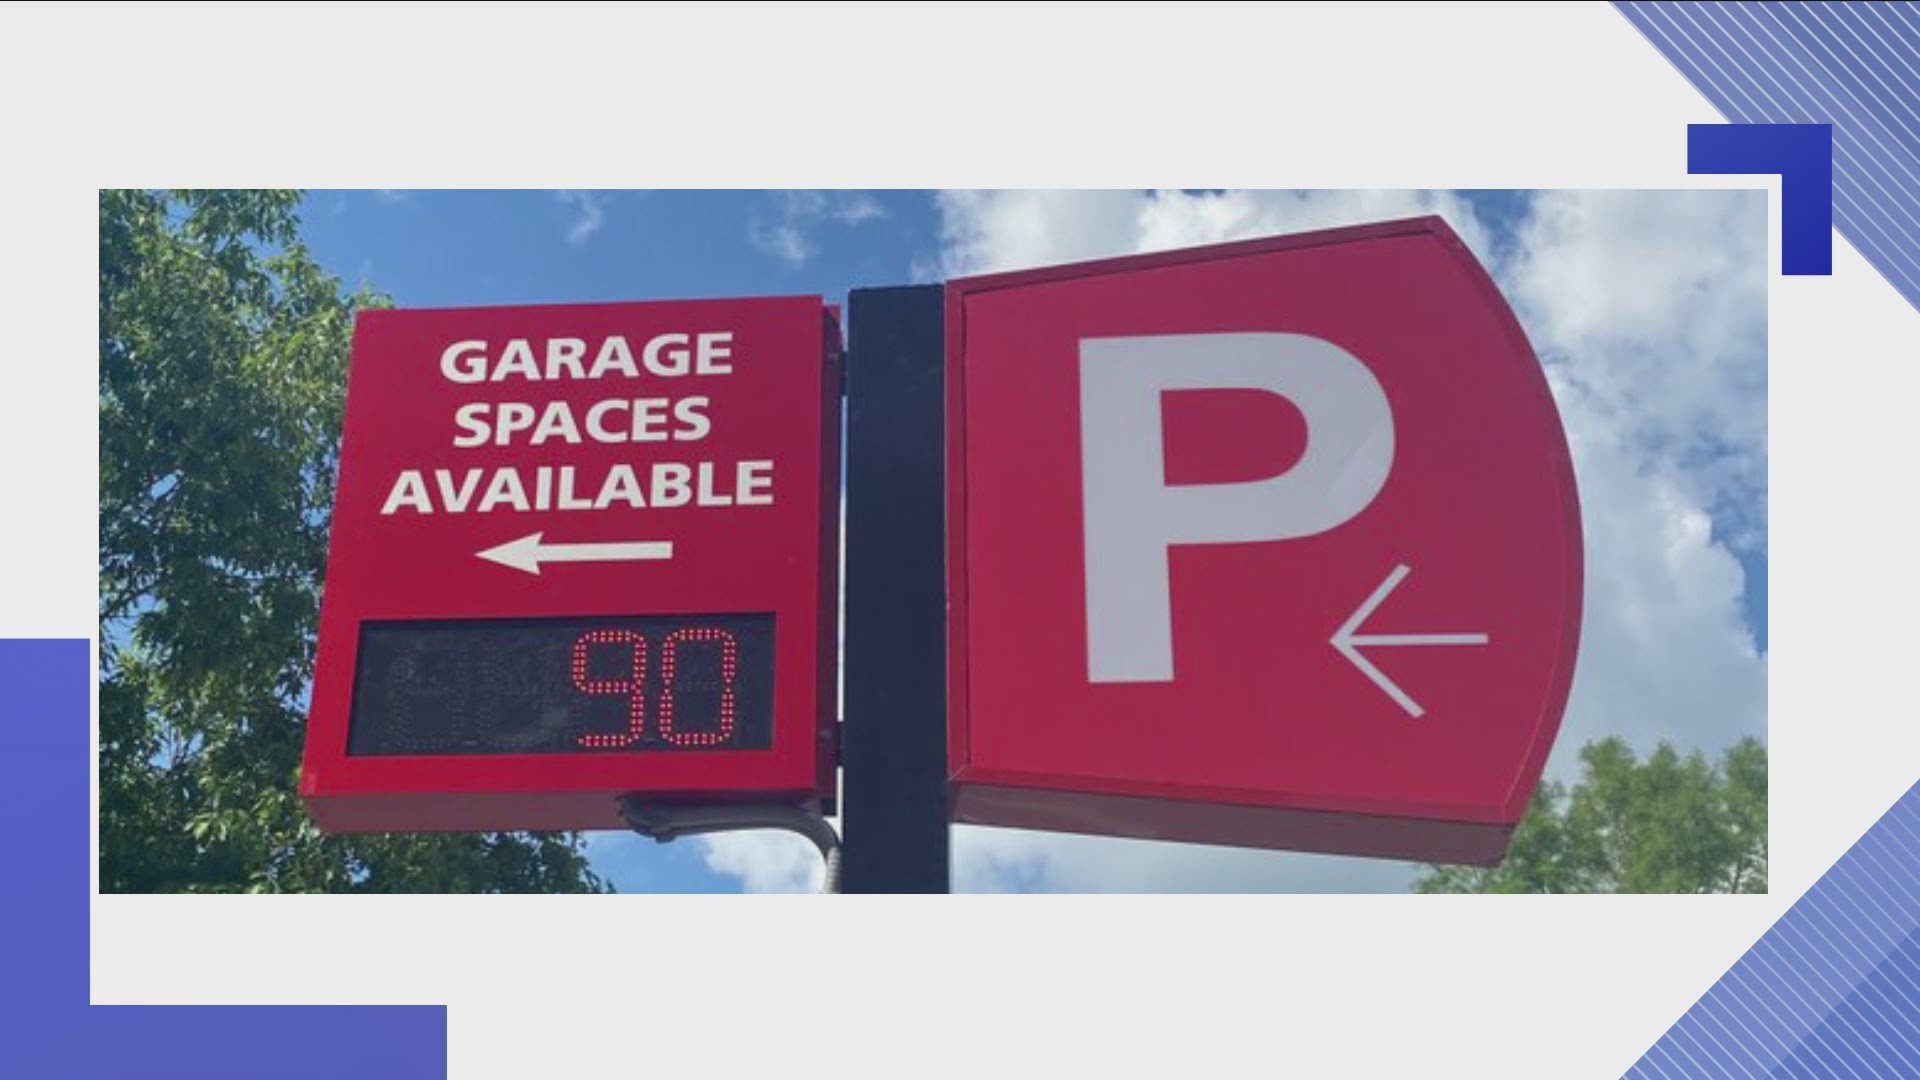 The signs will let drivers know how many parking spaces are available in two downtown garages. They were activated this week.